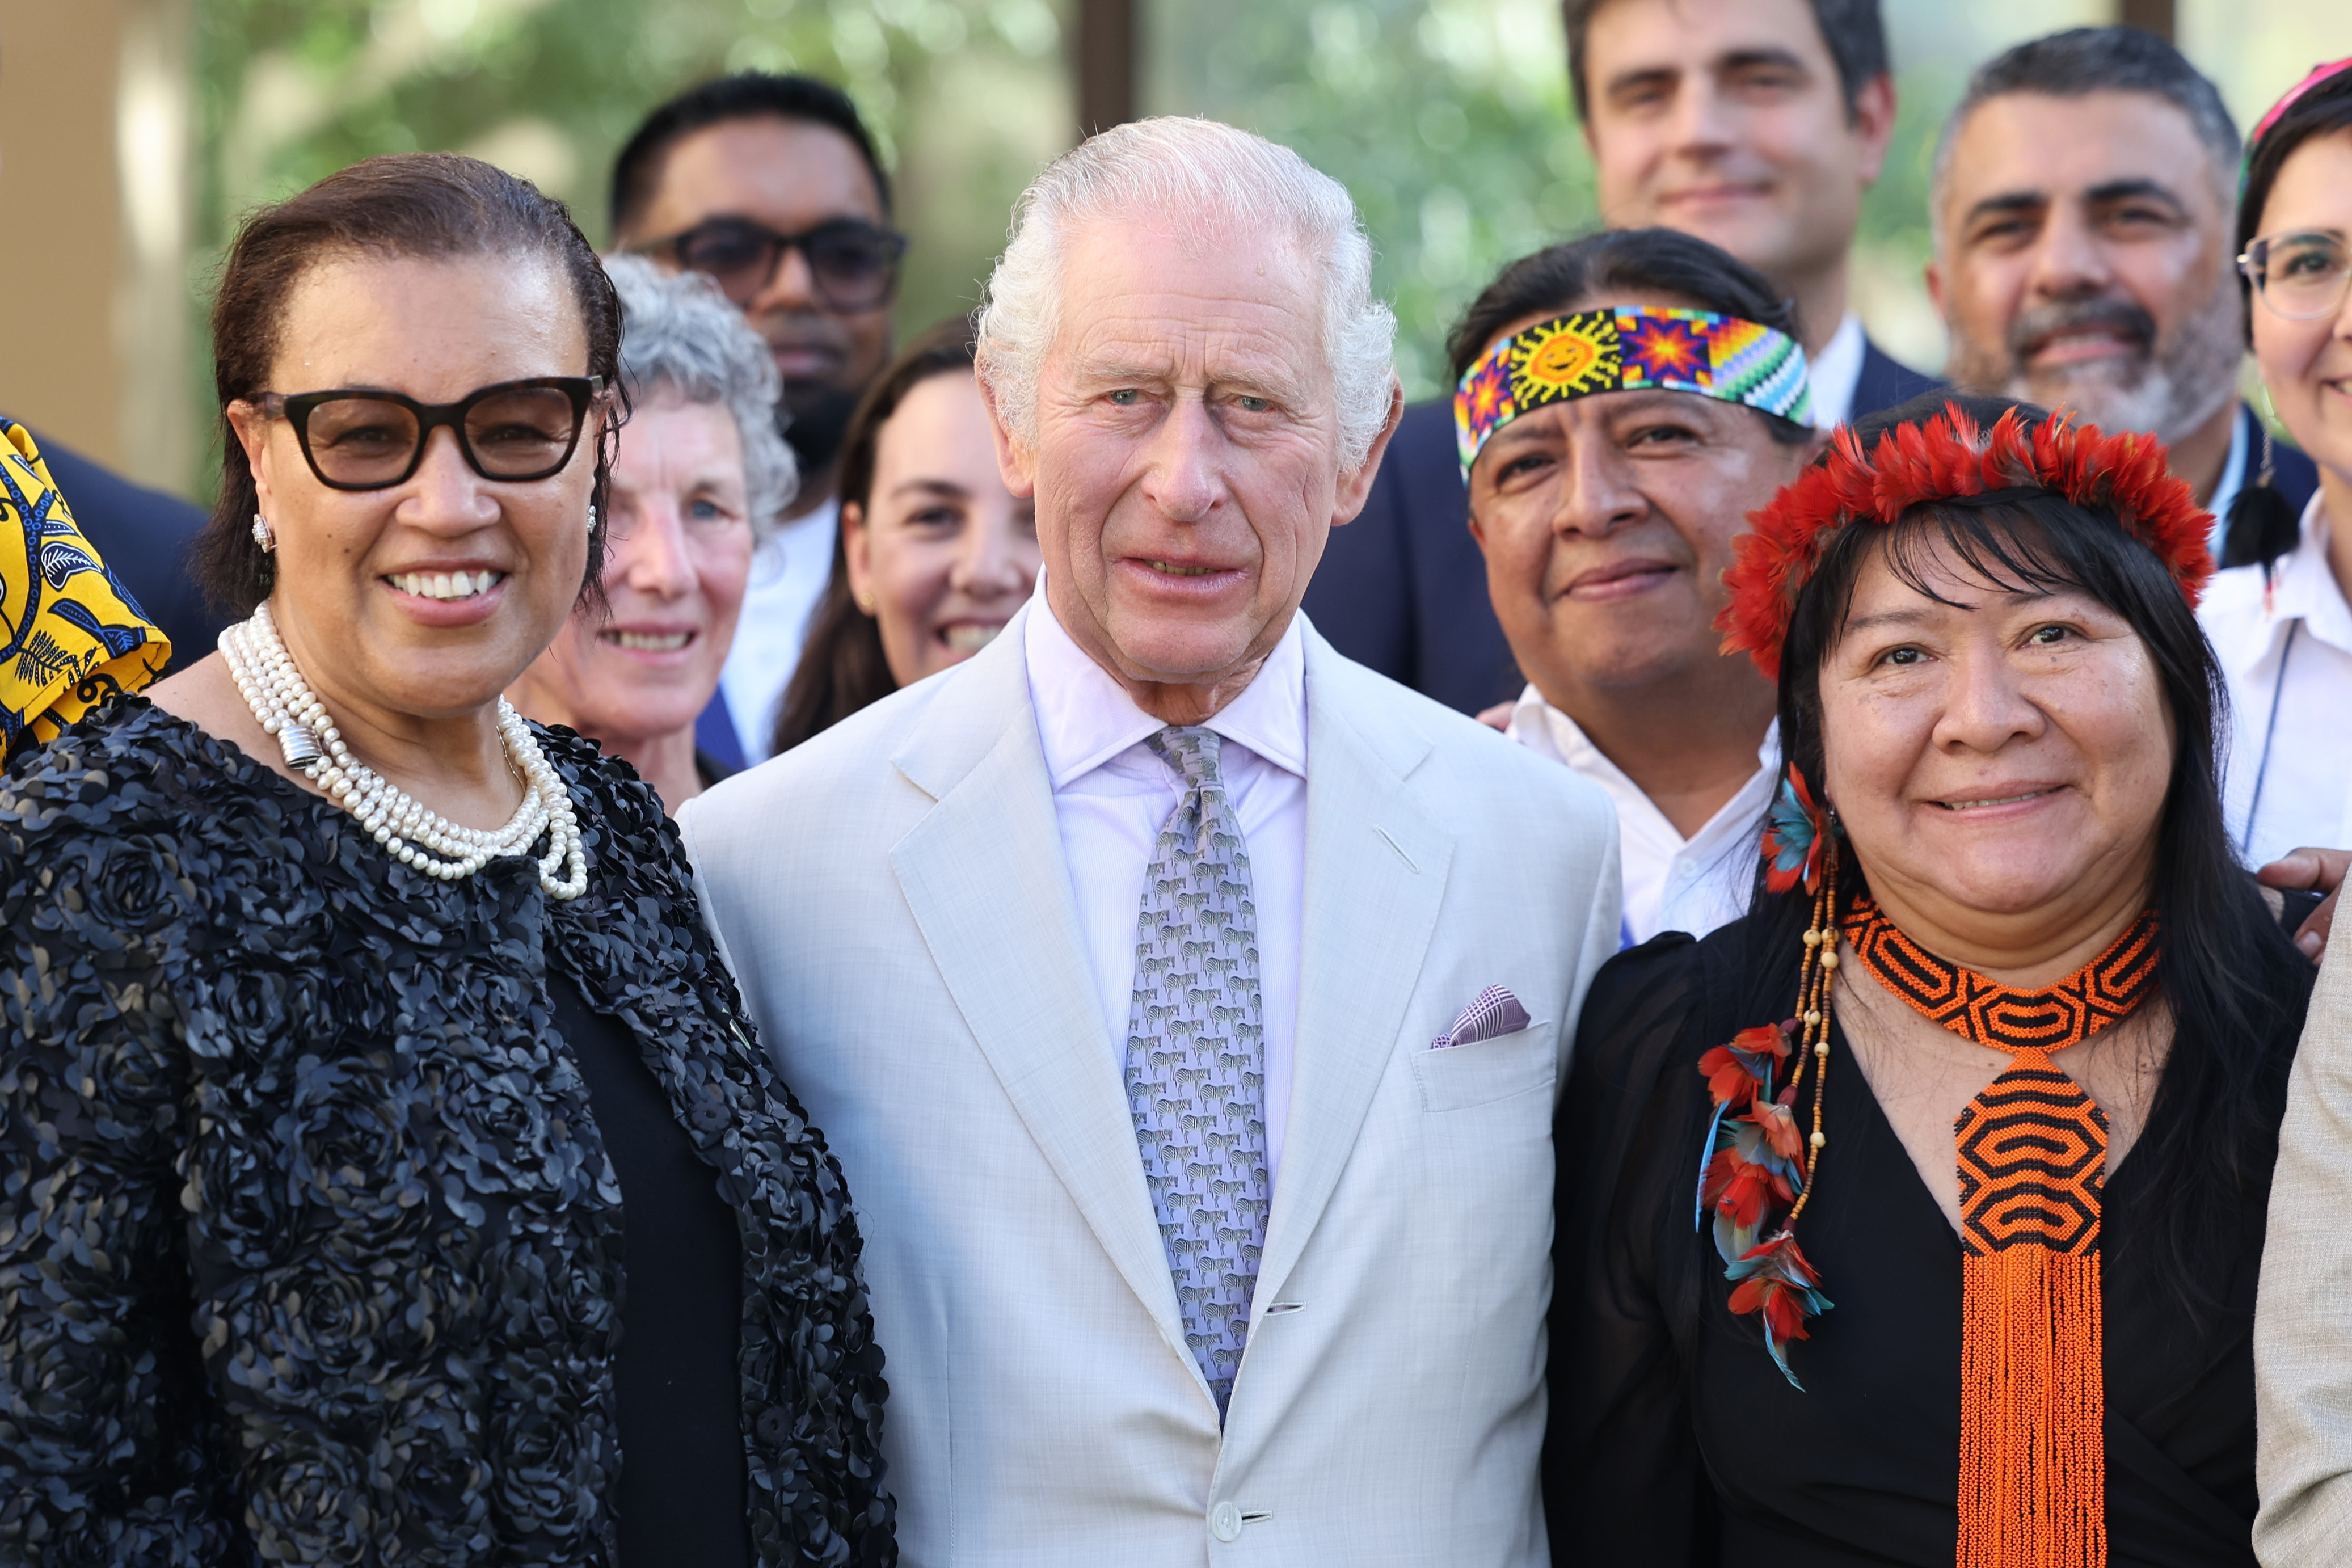 King Charles III poses with The Baroness Scotland of Asthal Patricia Scotland (L), Joênia Wapixana (R), and other representatives at the Commonwealth and Nature reception during COP28 in Dubai, United Arab Emirates on November 30, 2023. | Source: Getty Images